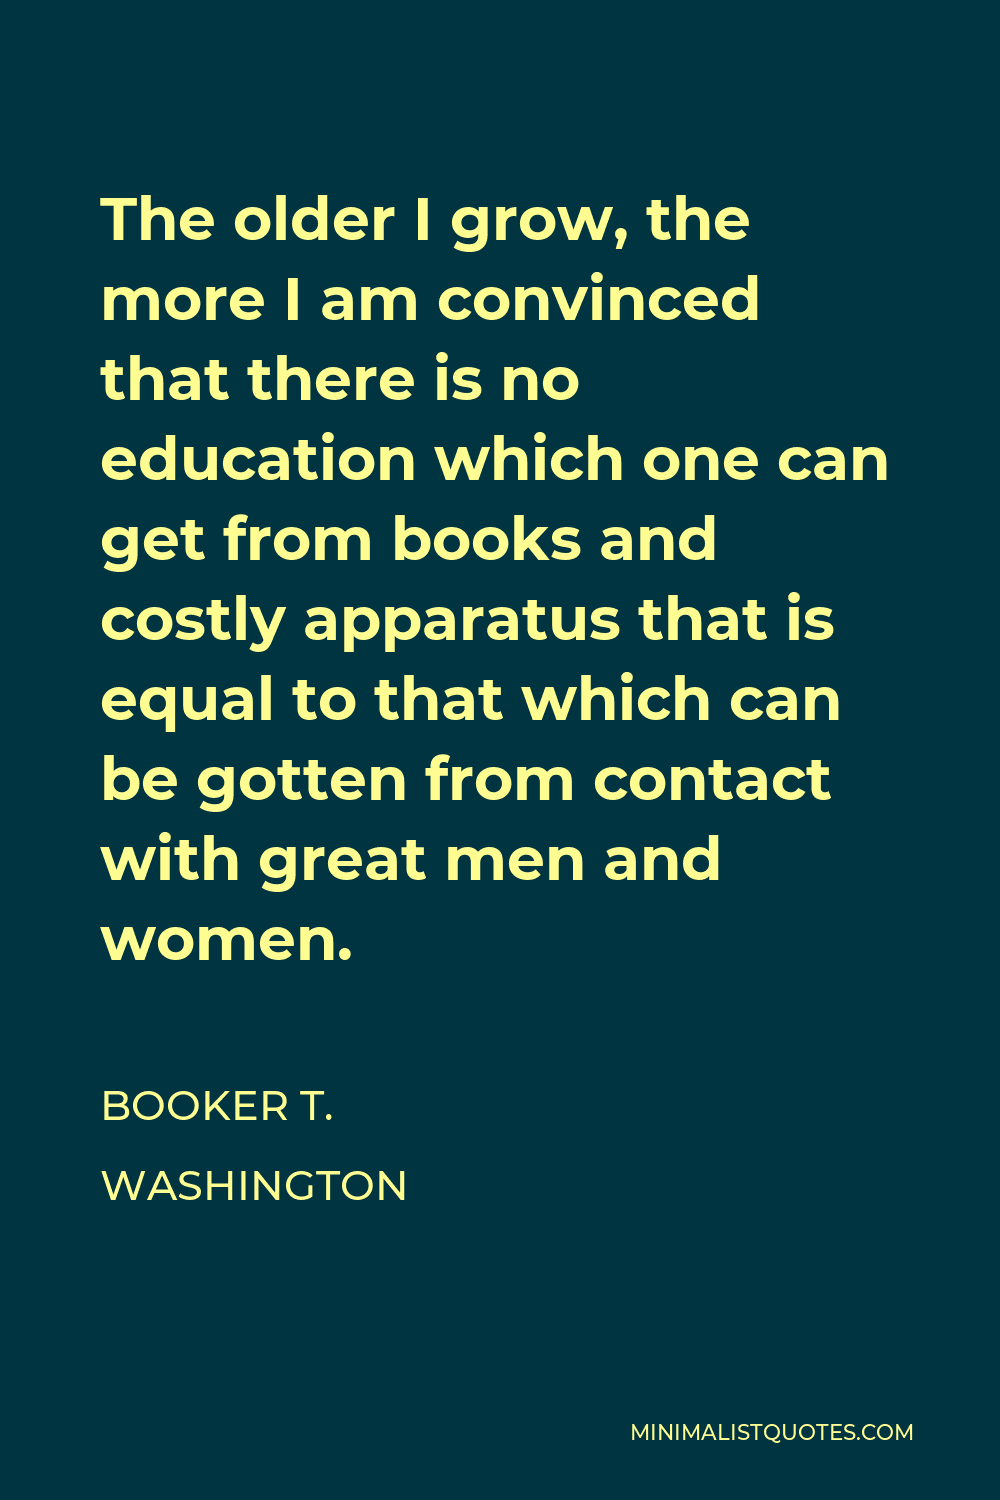 Booker T. Washington Quote - The older I grow, the more I am convinced that there is no education which one can get from books and costly apparatus that is equal to that which can be gotten from contact with great men and women.